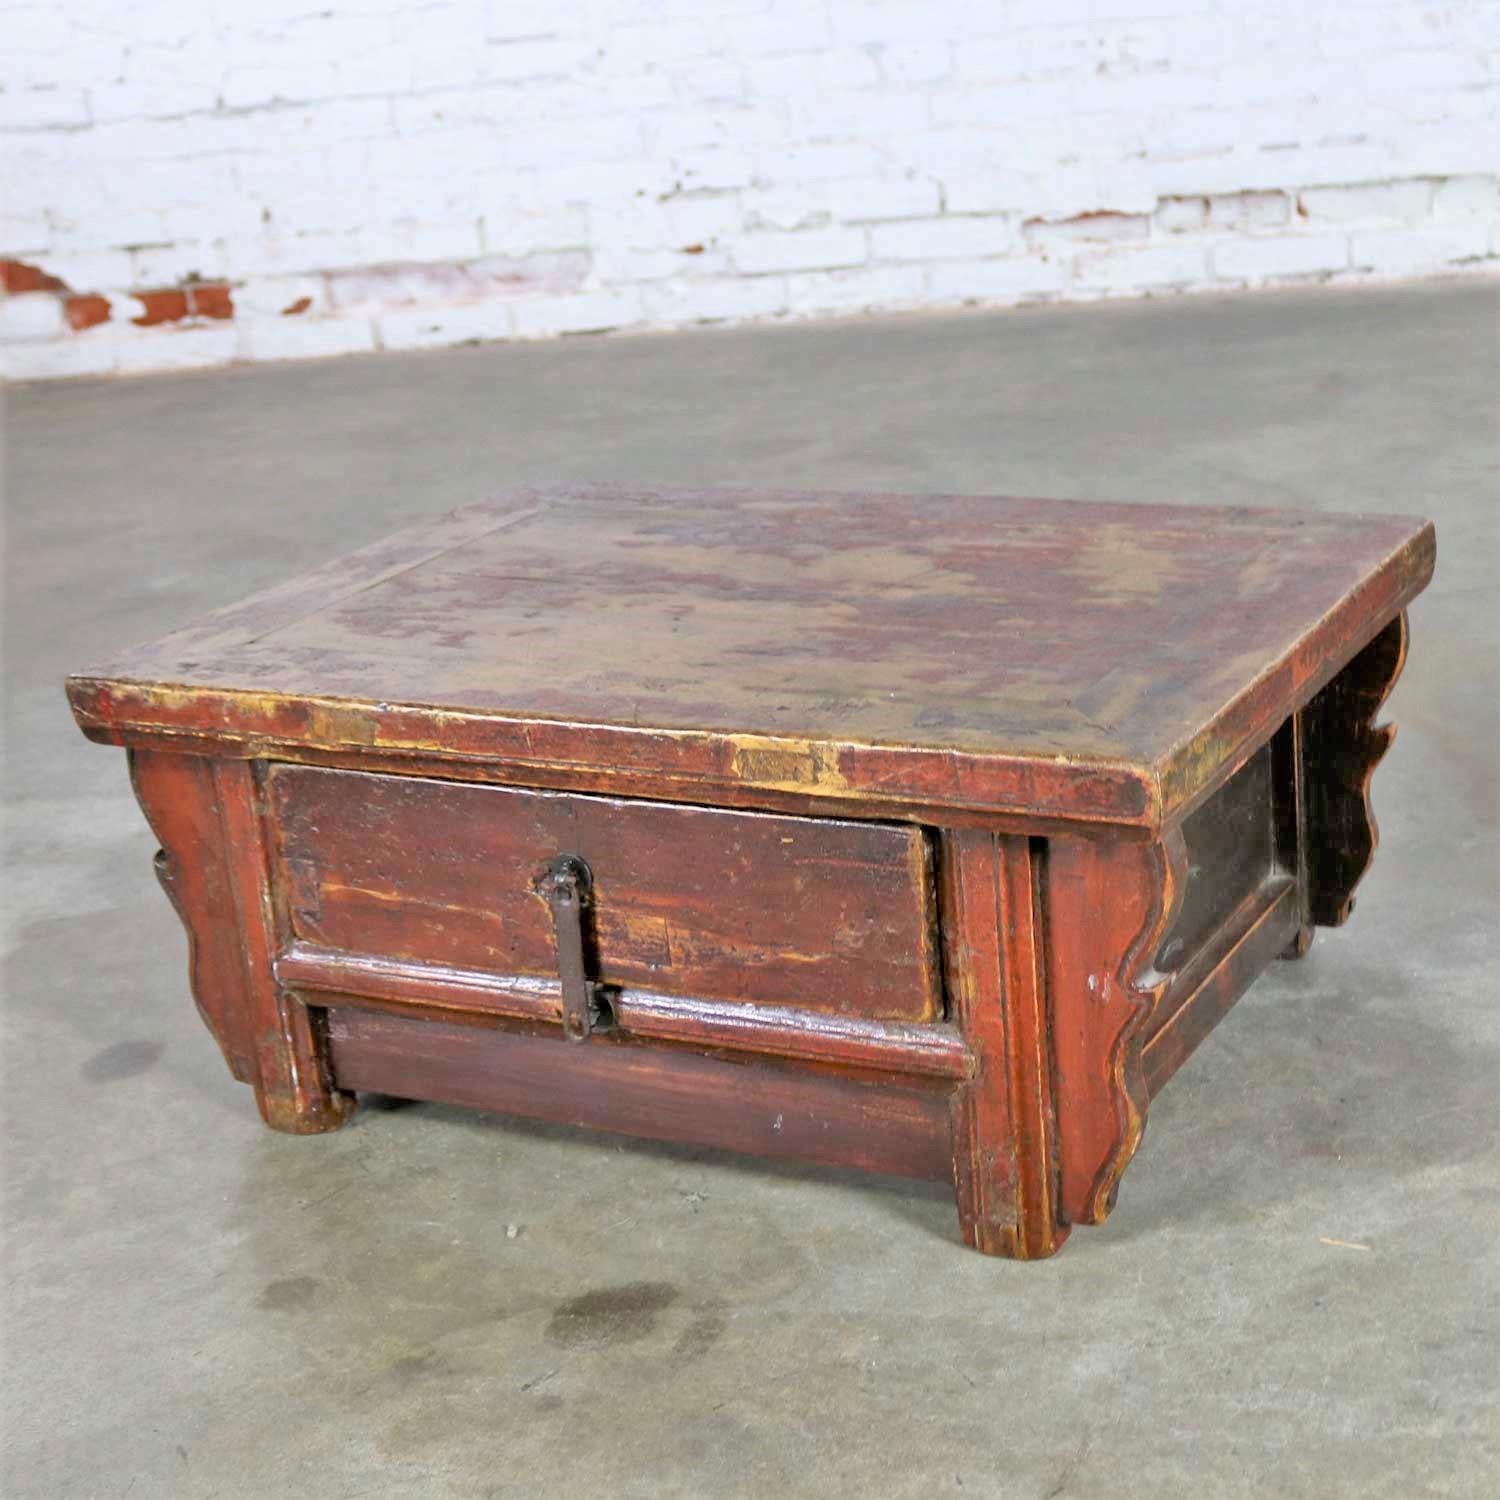 Handsome antique Asian low table with a single drawer originally used for tea or as an altar. It is in wonderful antique condition with tons of beautiful age patina. Please see photos, circa 1850-1950.

This is a gorgeous piece of antique Asian